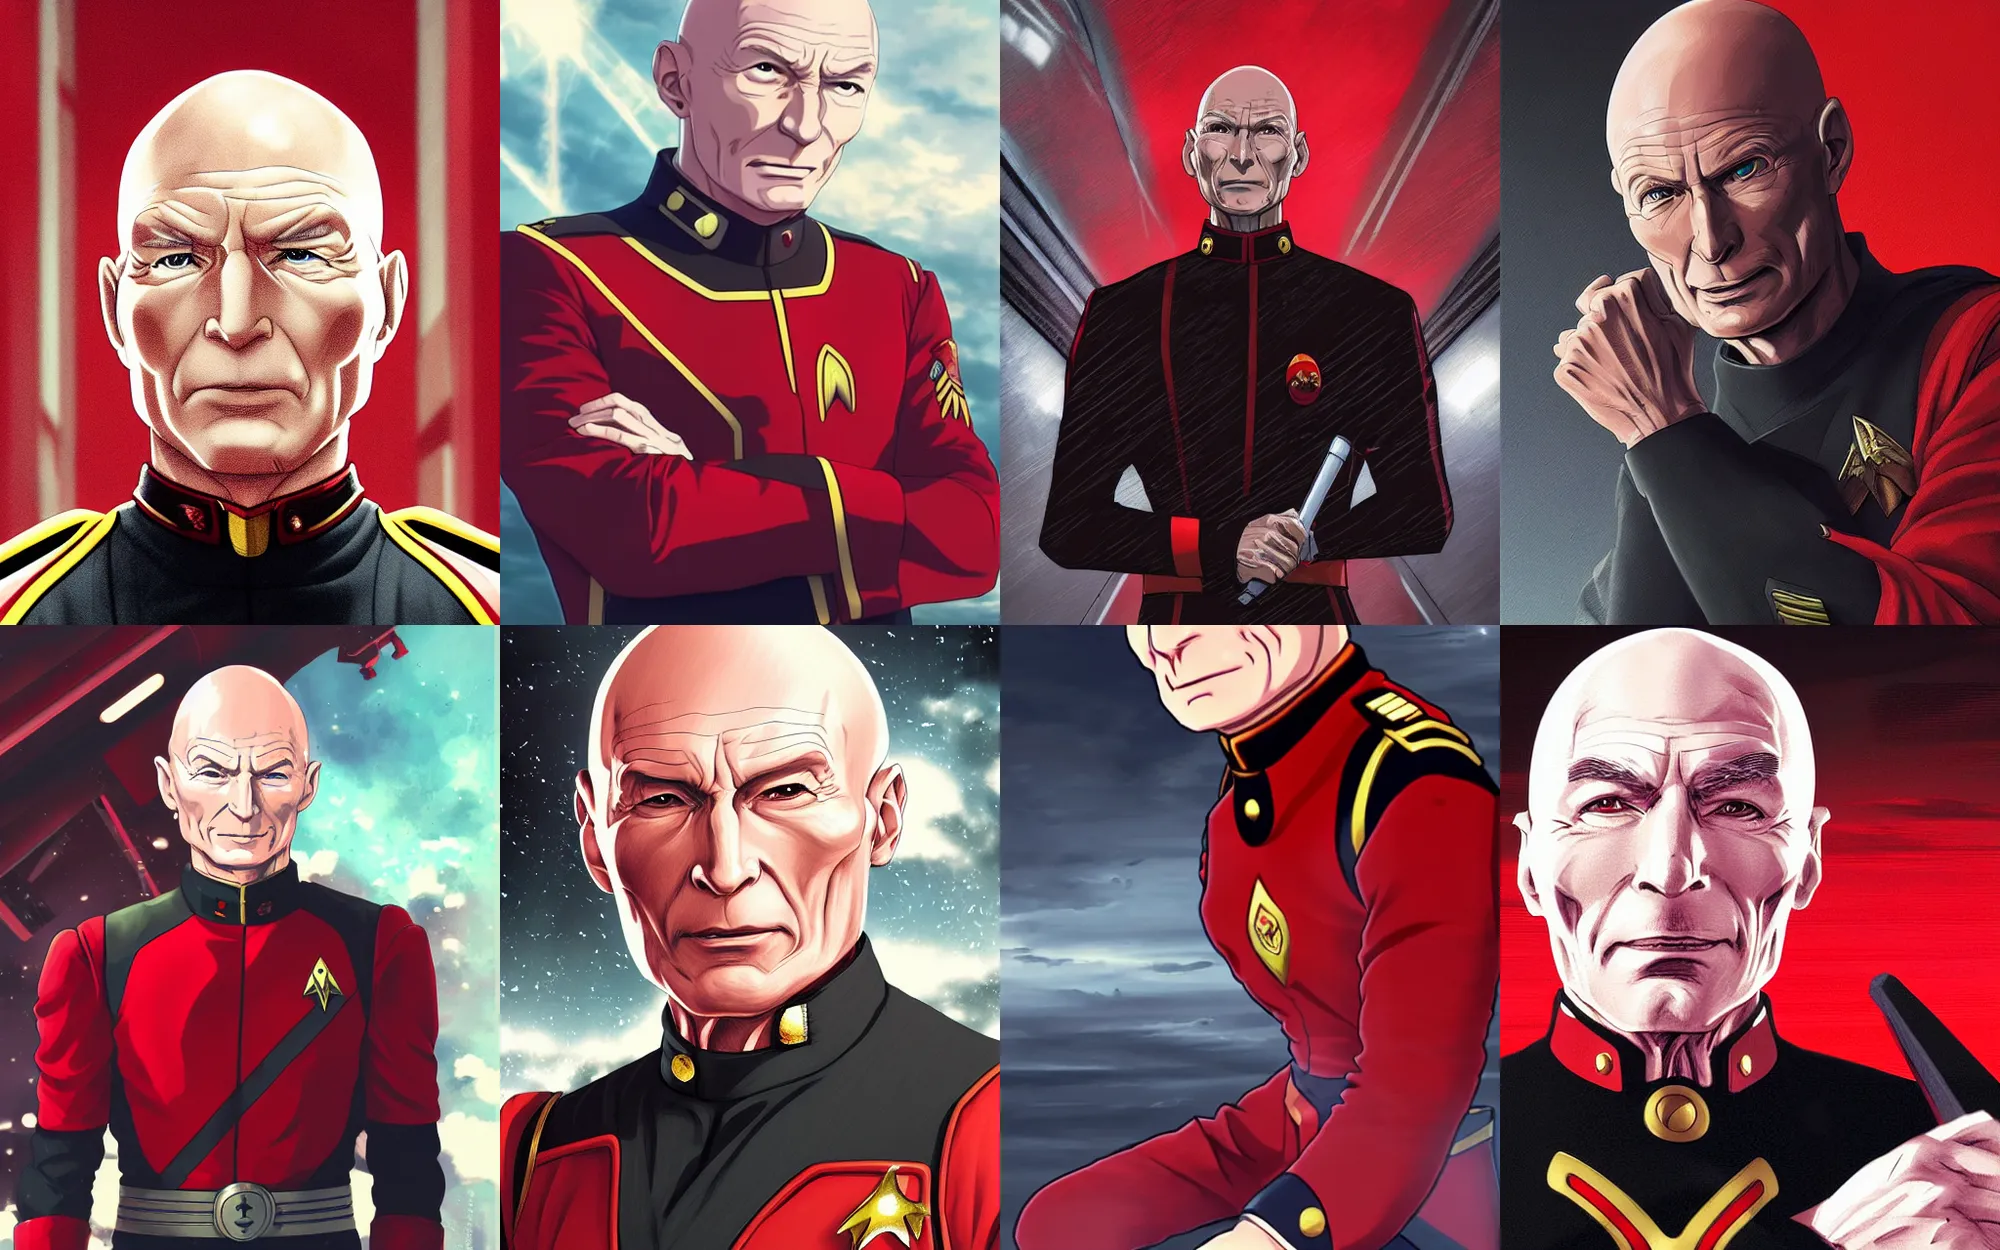 Prompt: Digital anime art by WLOP and Mobius, Closeup of Captain Picard wearing a red and black uniform, silver insignia, serious expression, [[empty warehouse]] background, highly detailed, spotlight